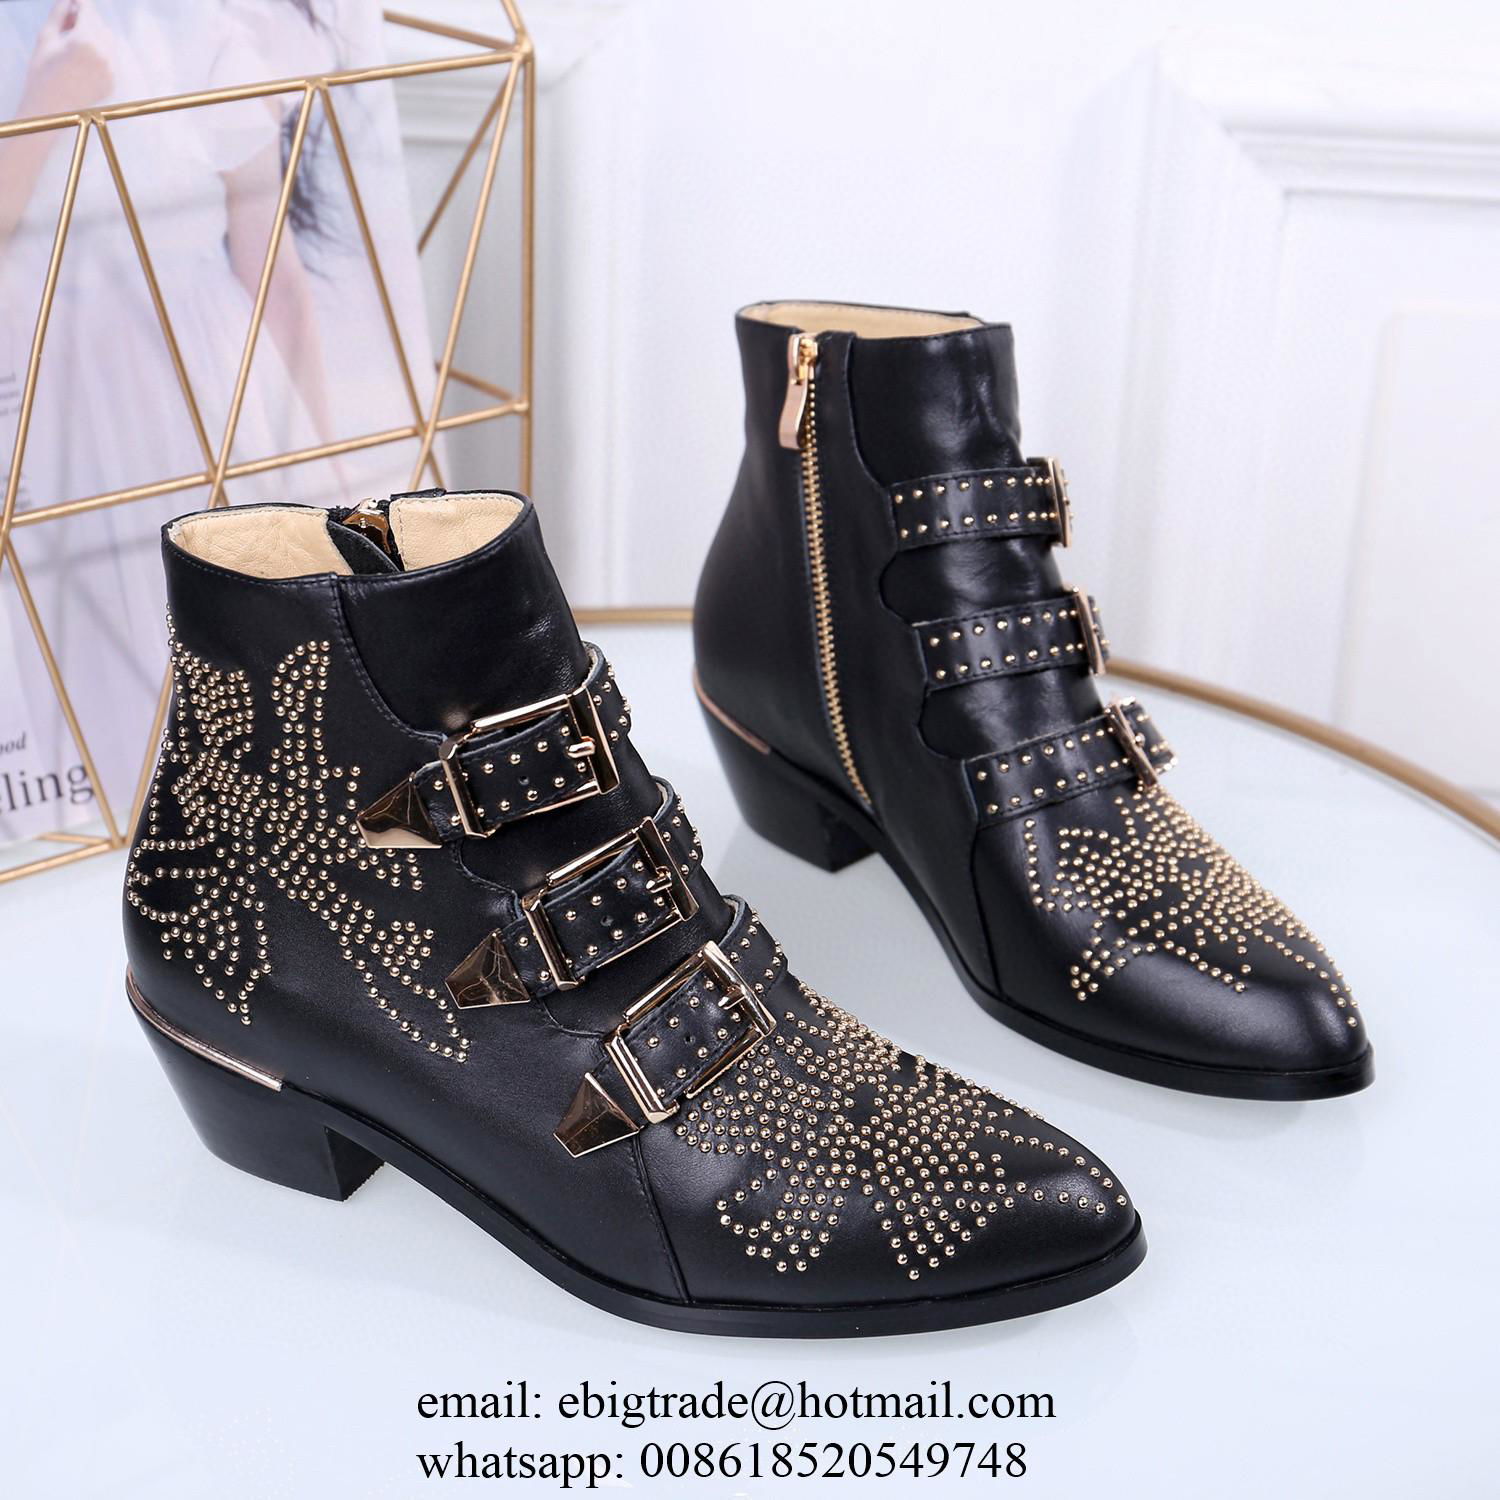 Wholesaler       Women's Ankle Boots       Rylee Boots       Snakeskin boots